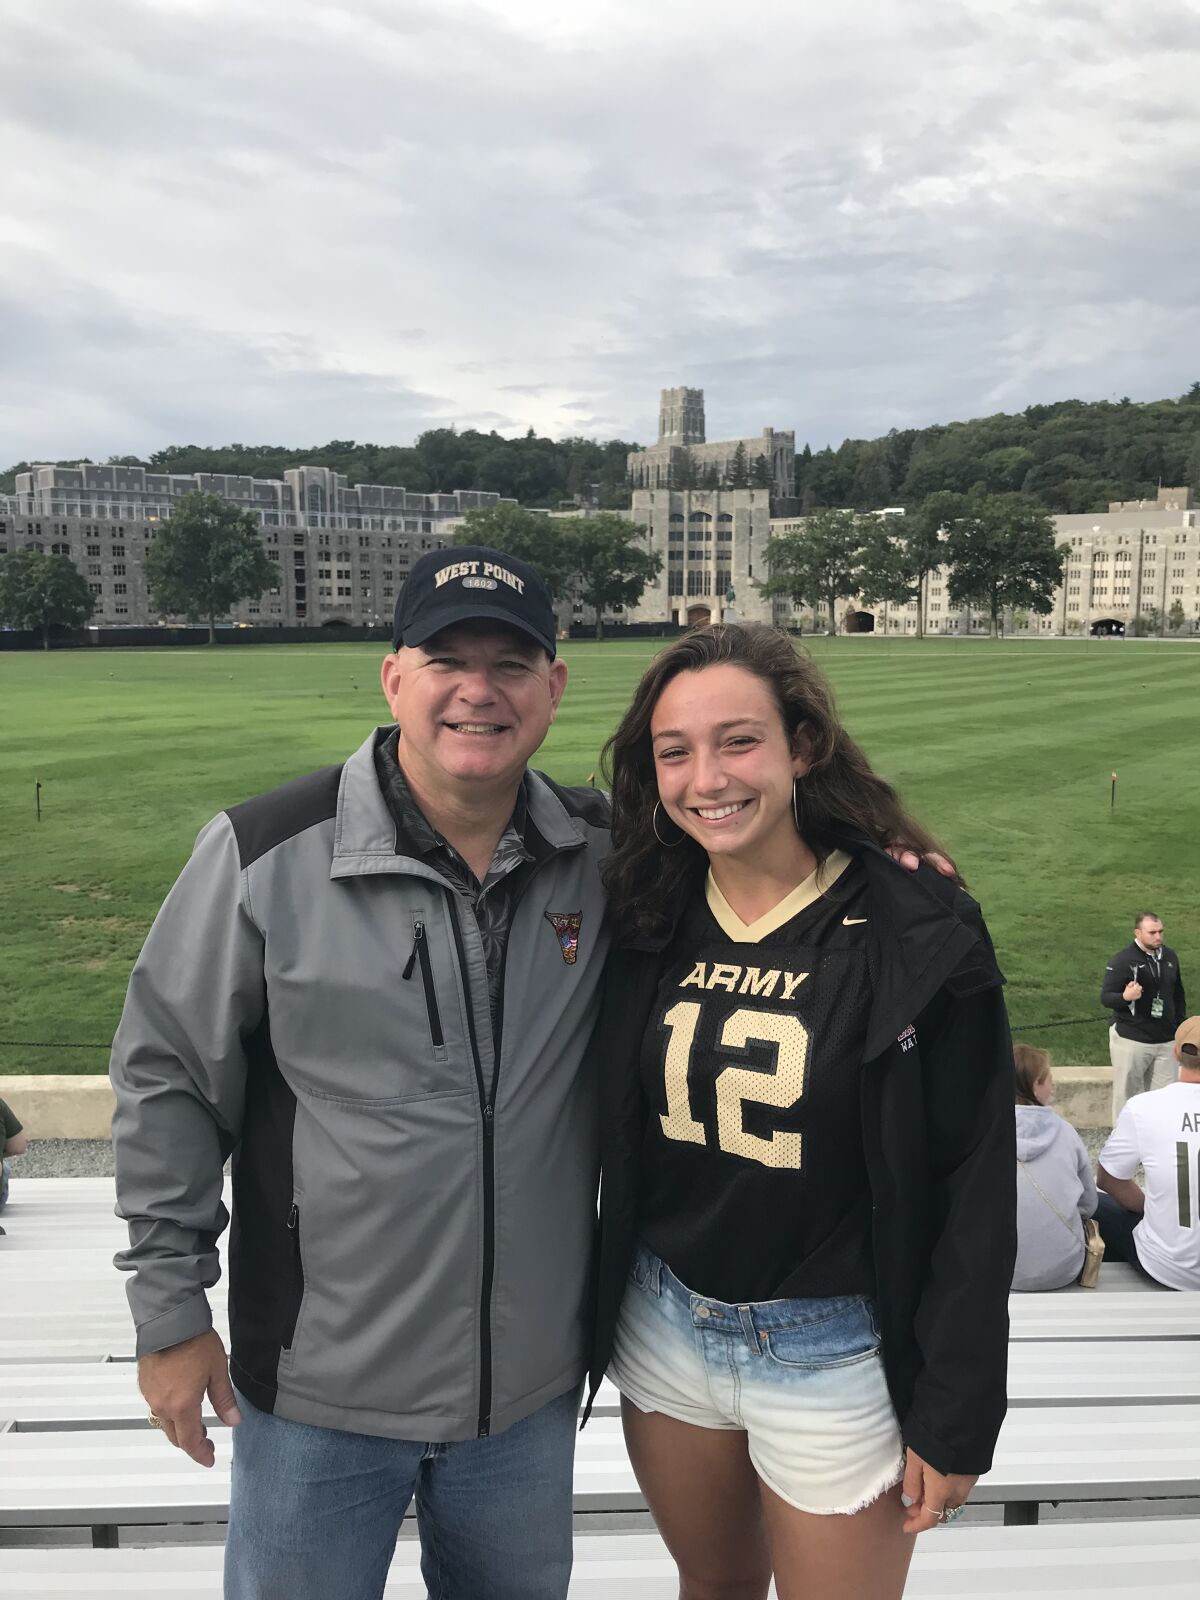 Charles Hartford, West Point Class of 1989, and his daughter Kate, West Point Class of 2024.